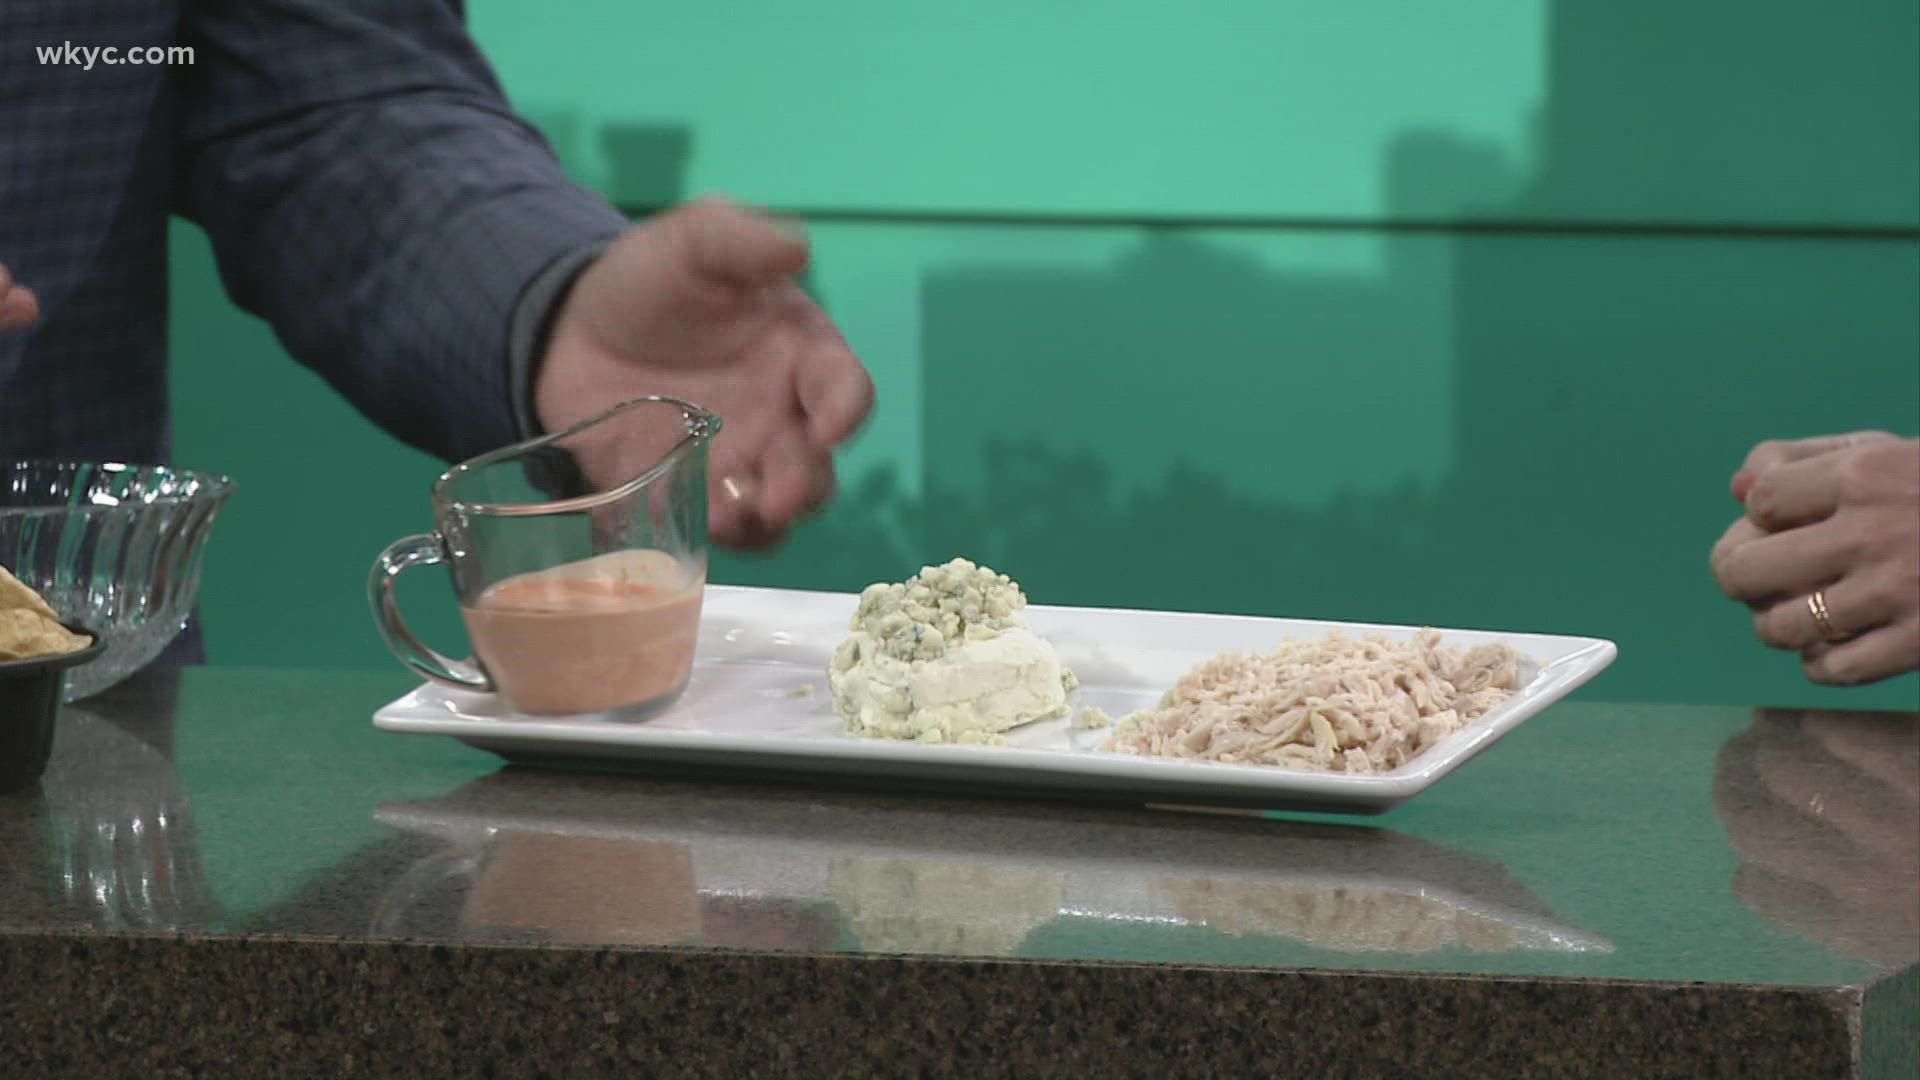 Our Football Friday's continue with even more delicious food. Jay Crawford shares his recipe for Buffalo Chicken Dip!